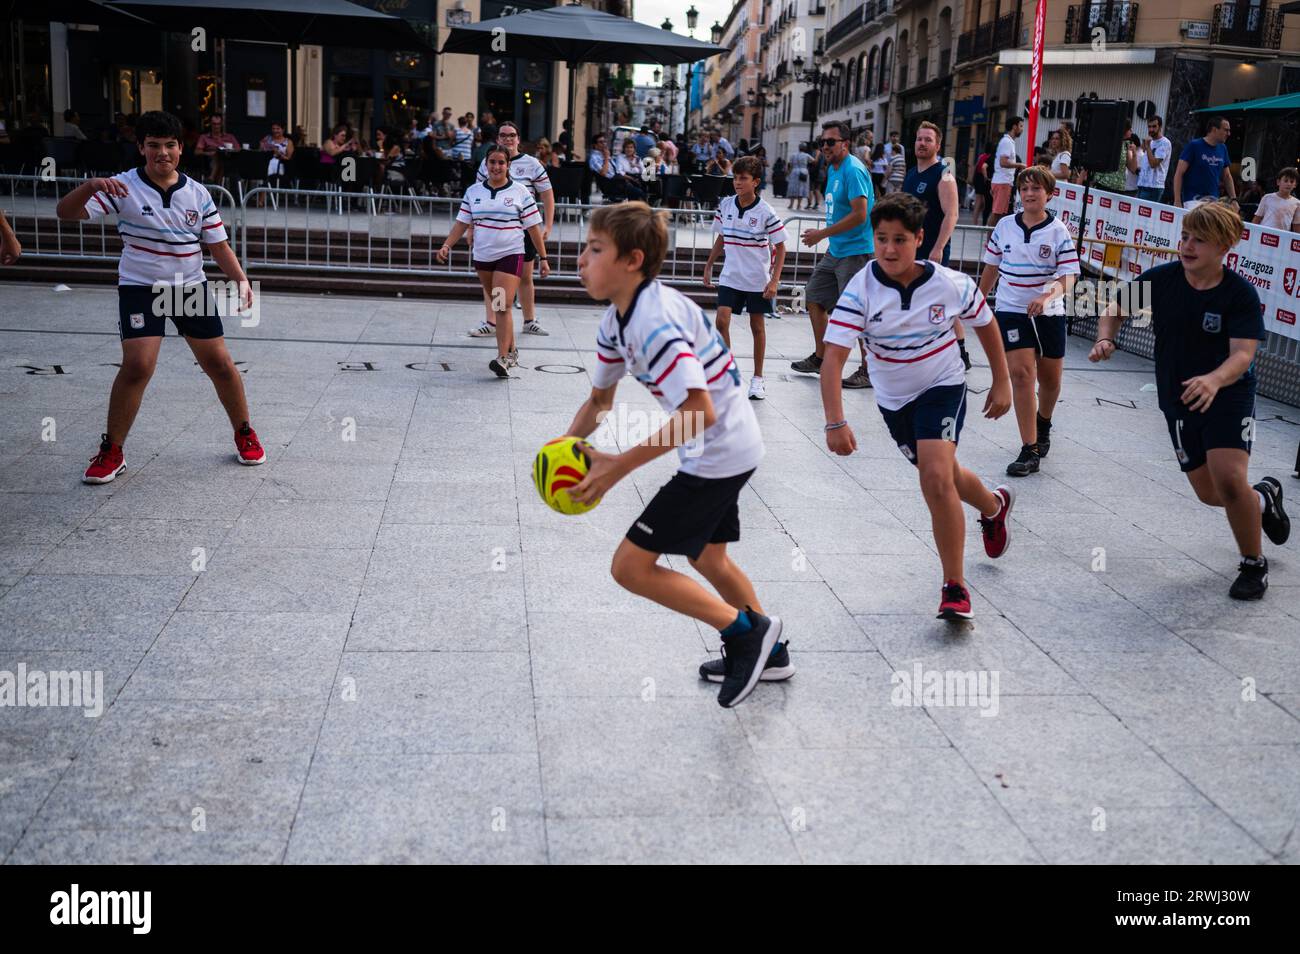 Kids trying rugby during Sports Day multi-sports street event in Plaza del Pilar, Zaragoza, Spain Stock Photo